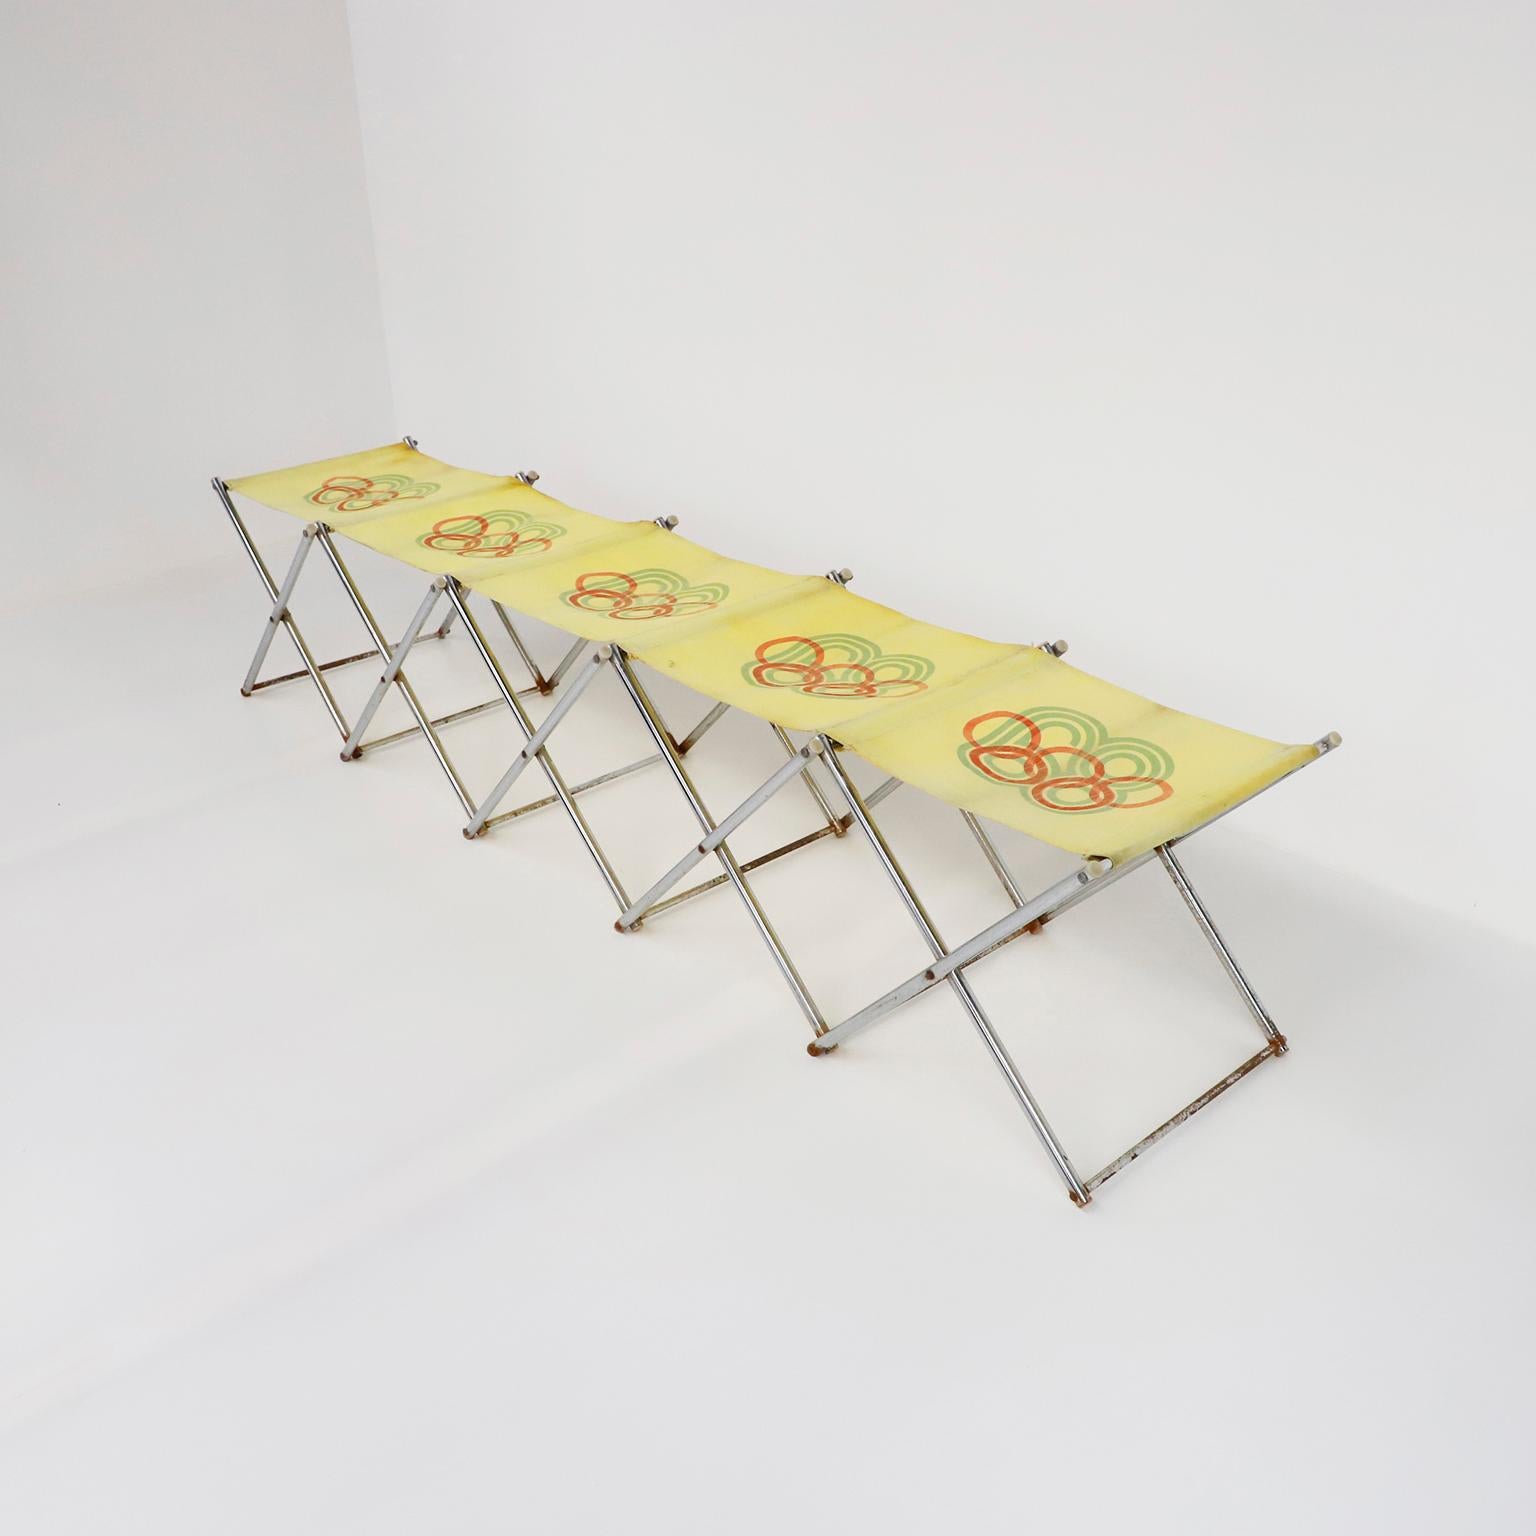 Original vintage Olympic folding bench for 5 seats Mexico 68 with graphic design lines logo. Officially known as the Games of the XIX Olympiad held from 12-27 October 1968, featuring the iconic eye-catching event logo design by the notable American